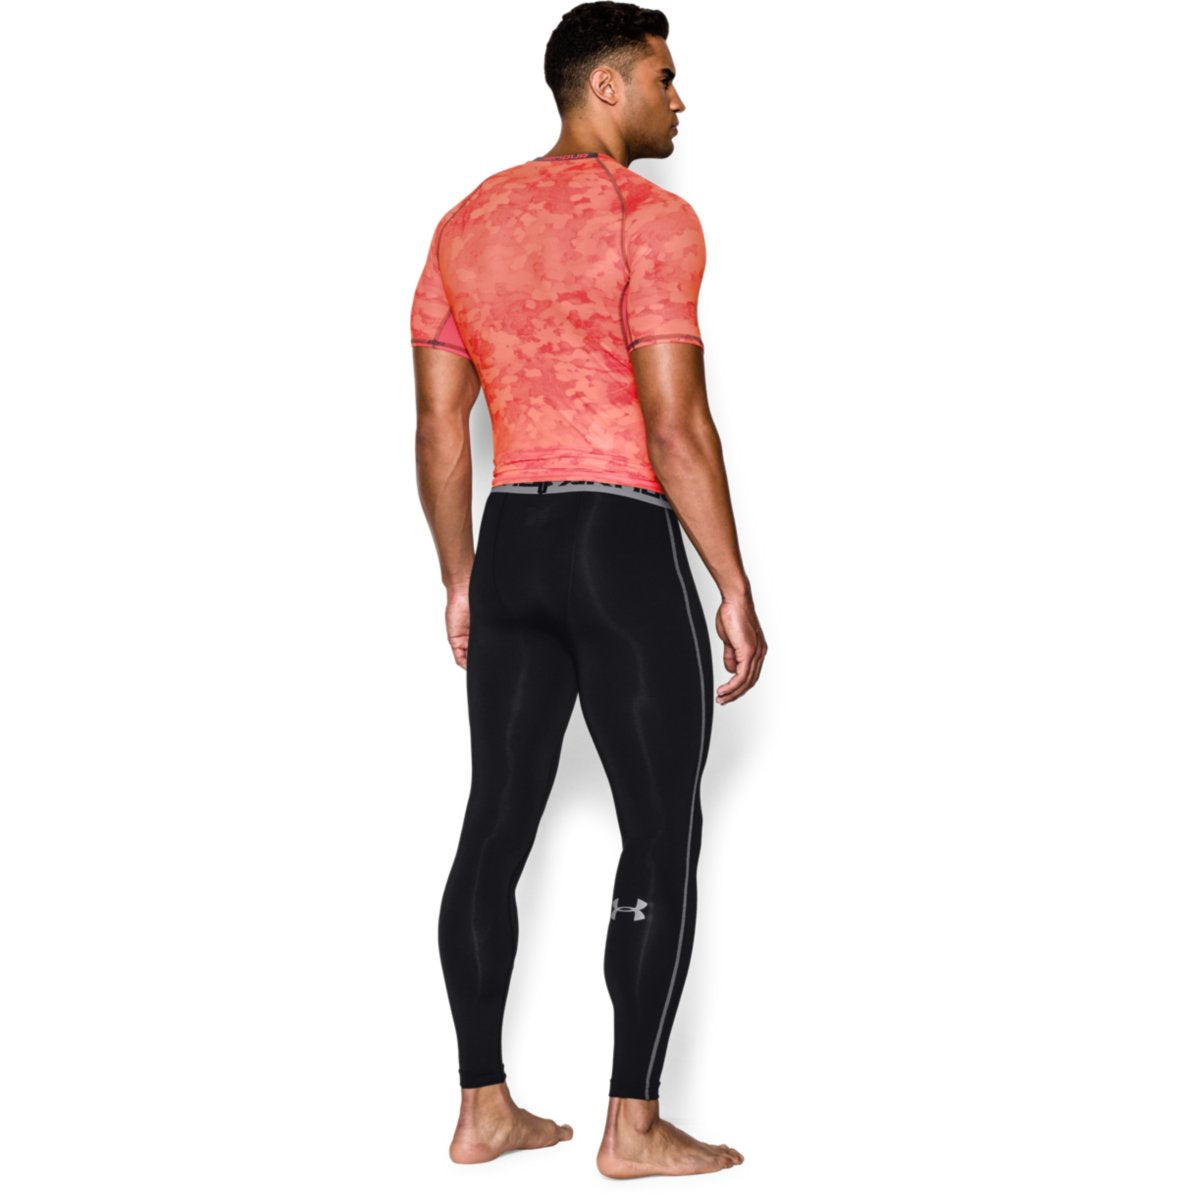 Компресійні штани Under Armour HeatGear CoolSwitch Compression Leggings  Black Red ᐉ buy at an excellent price in the online store